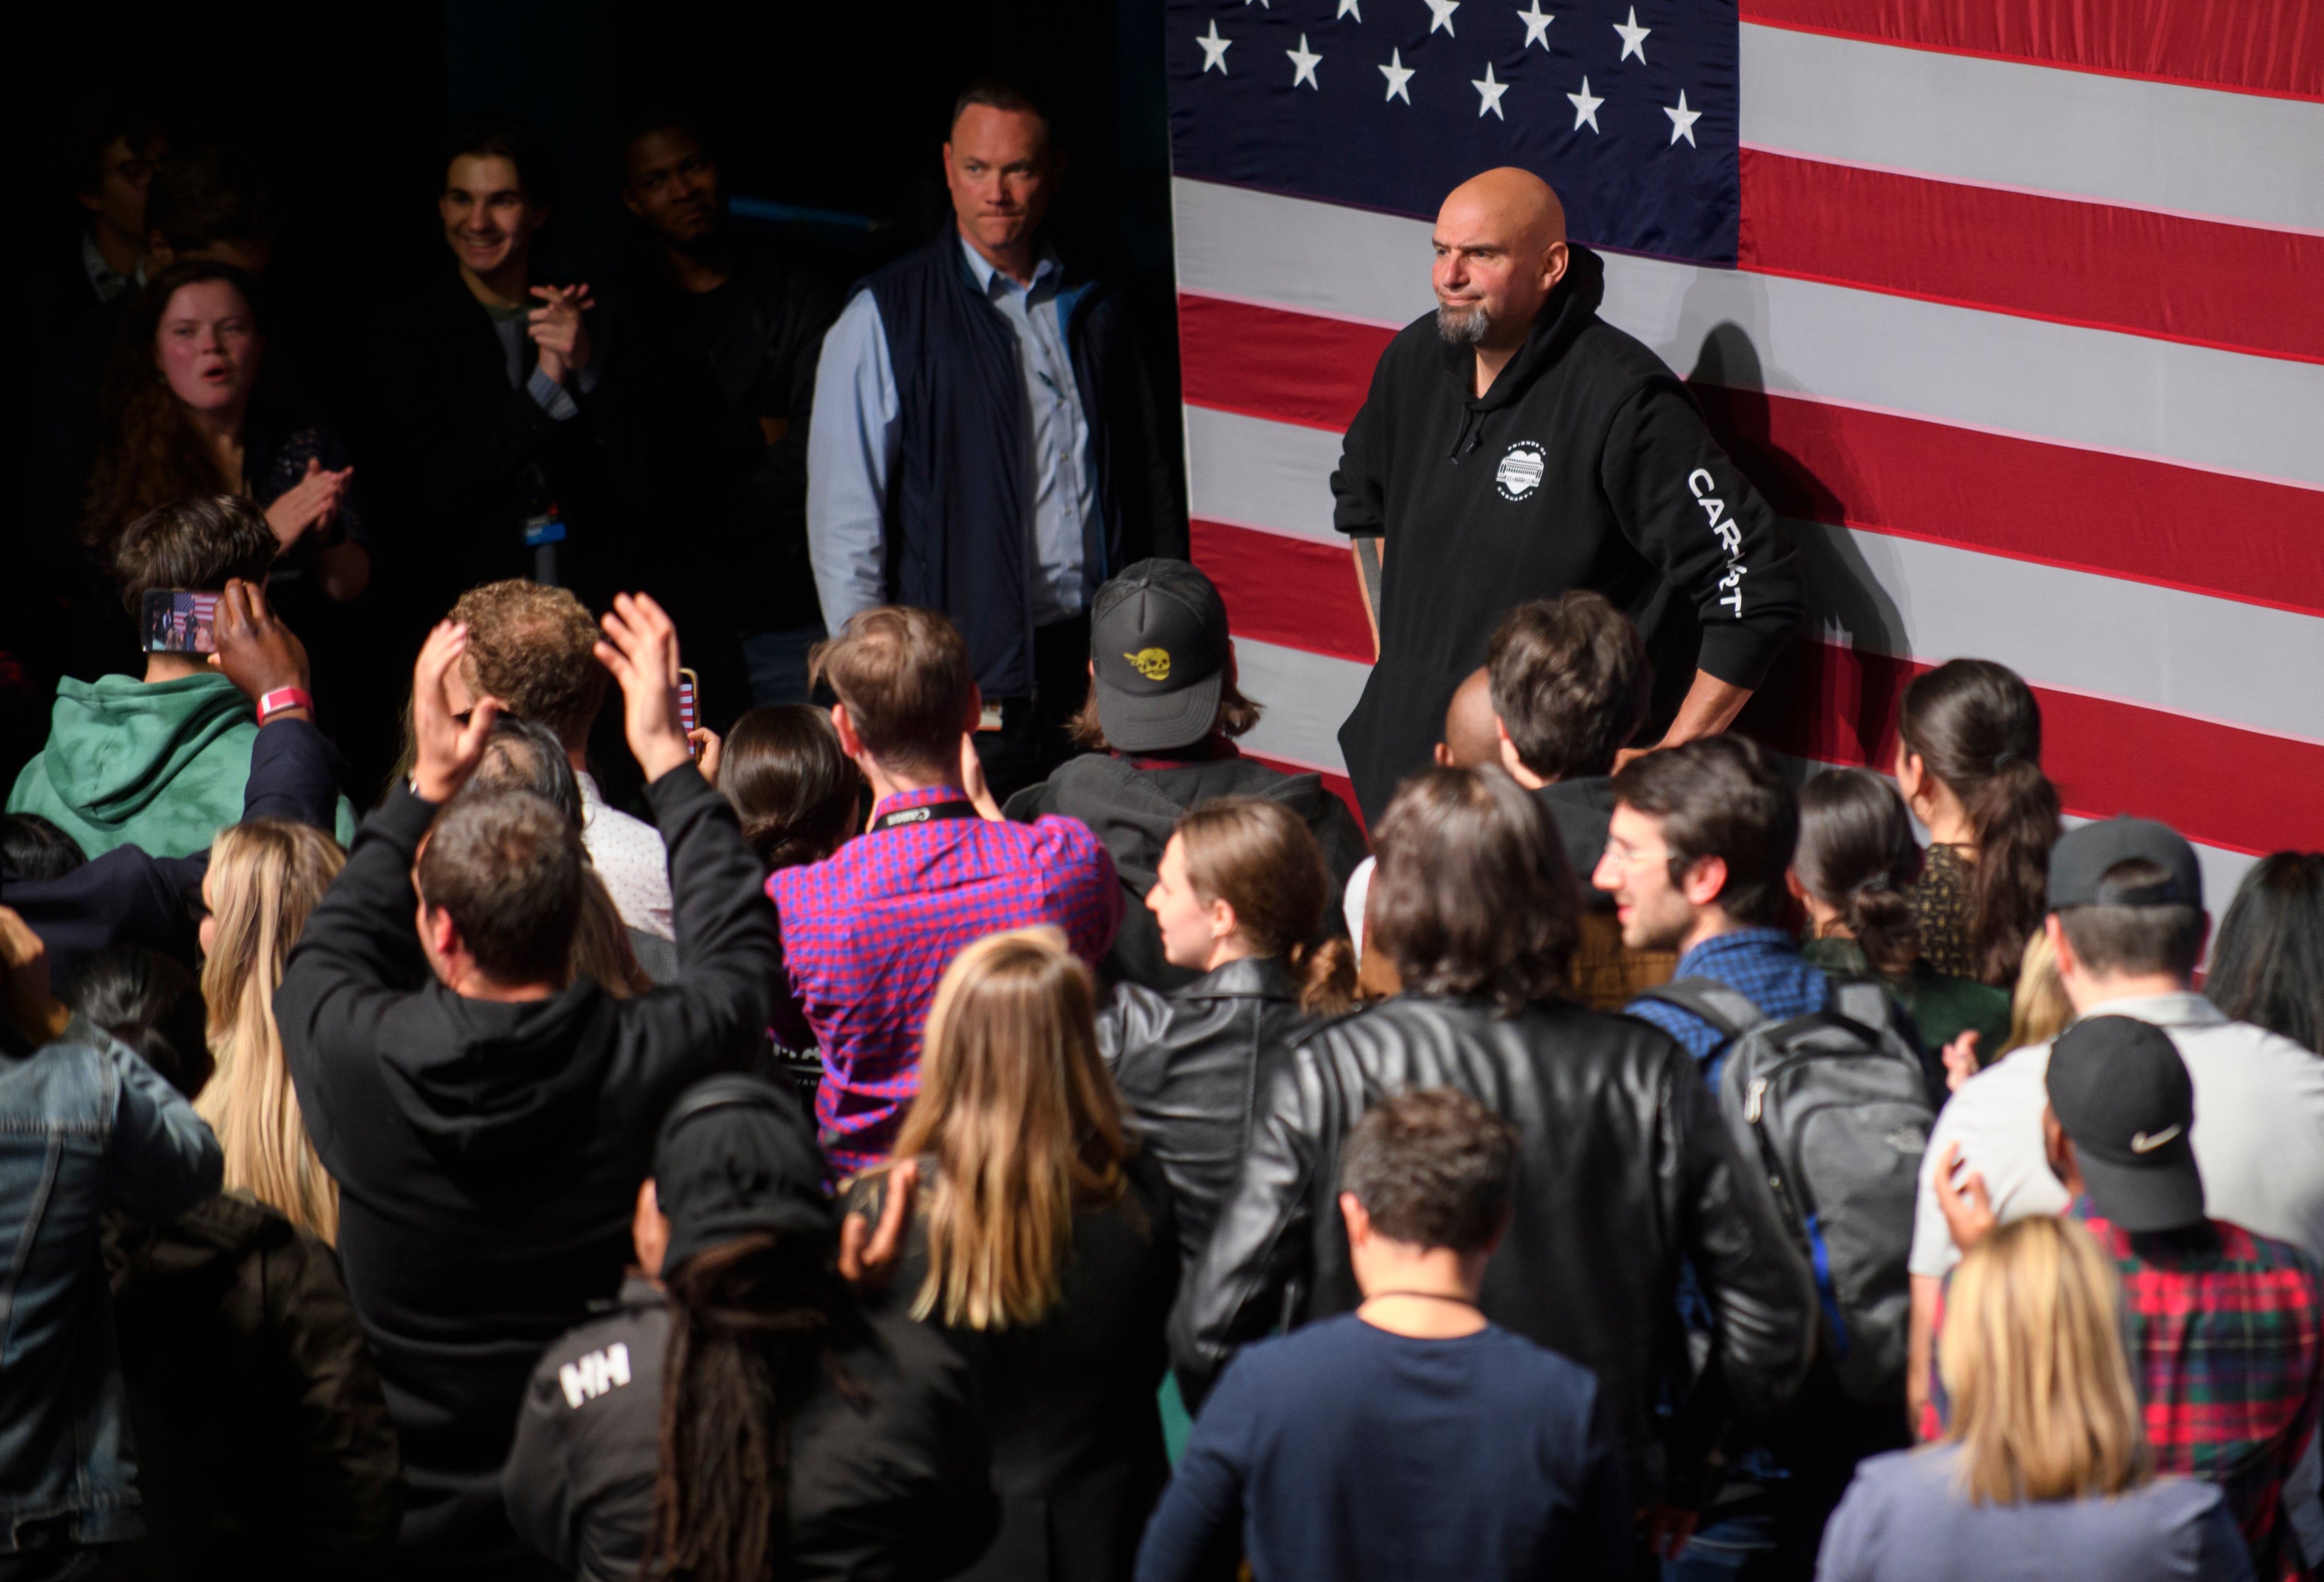 Democratic Senate candidate John Fetterman speaks to supporters during an election night party at StageAE on November 9, 2022 in Pittsburgh, Pennsylvania